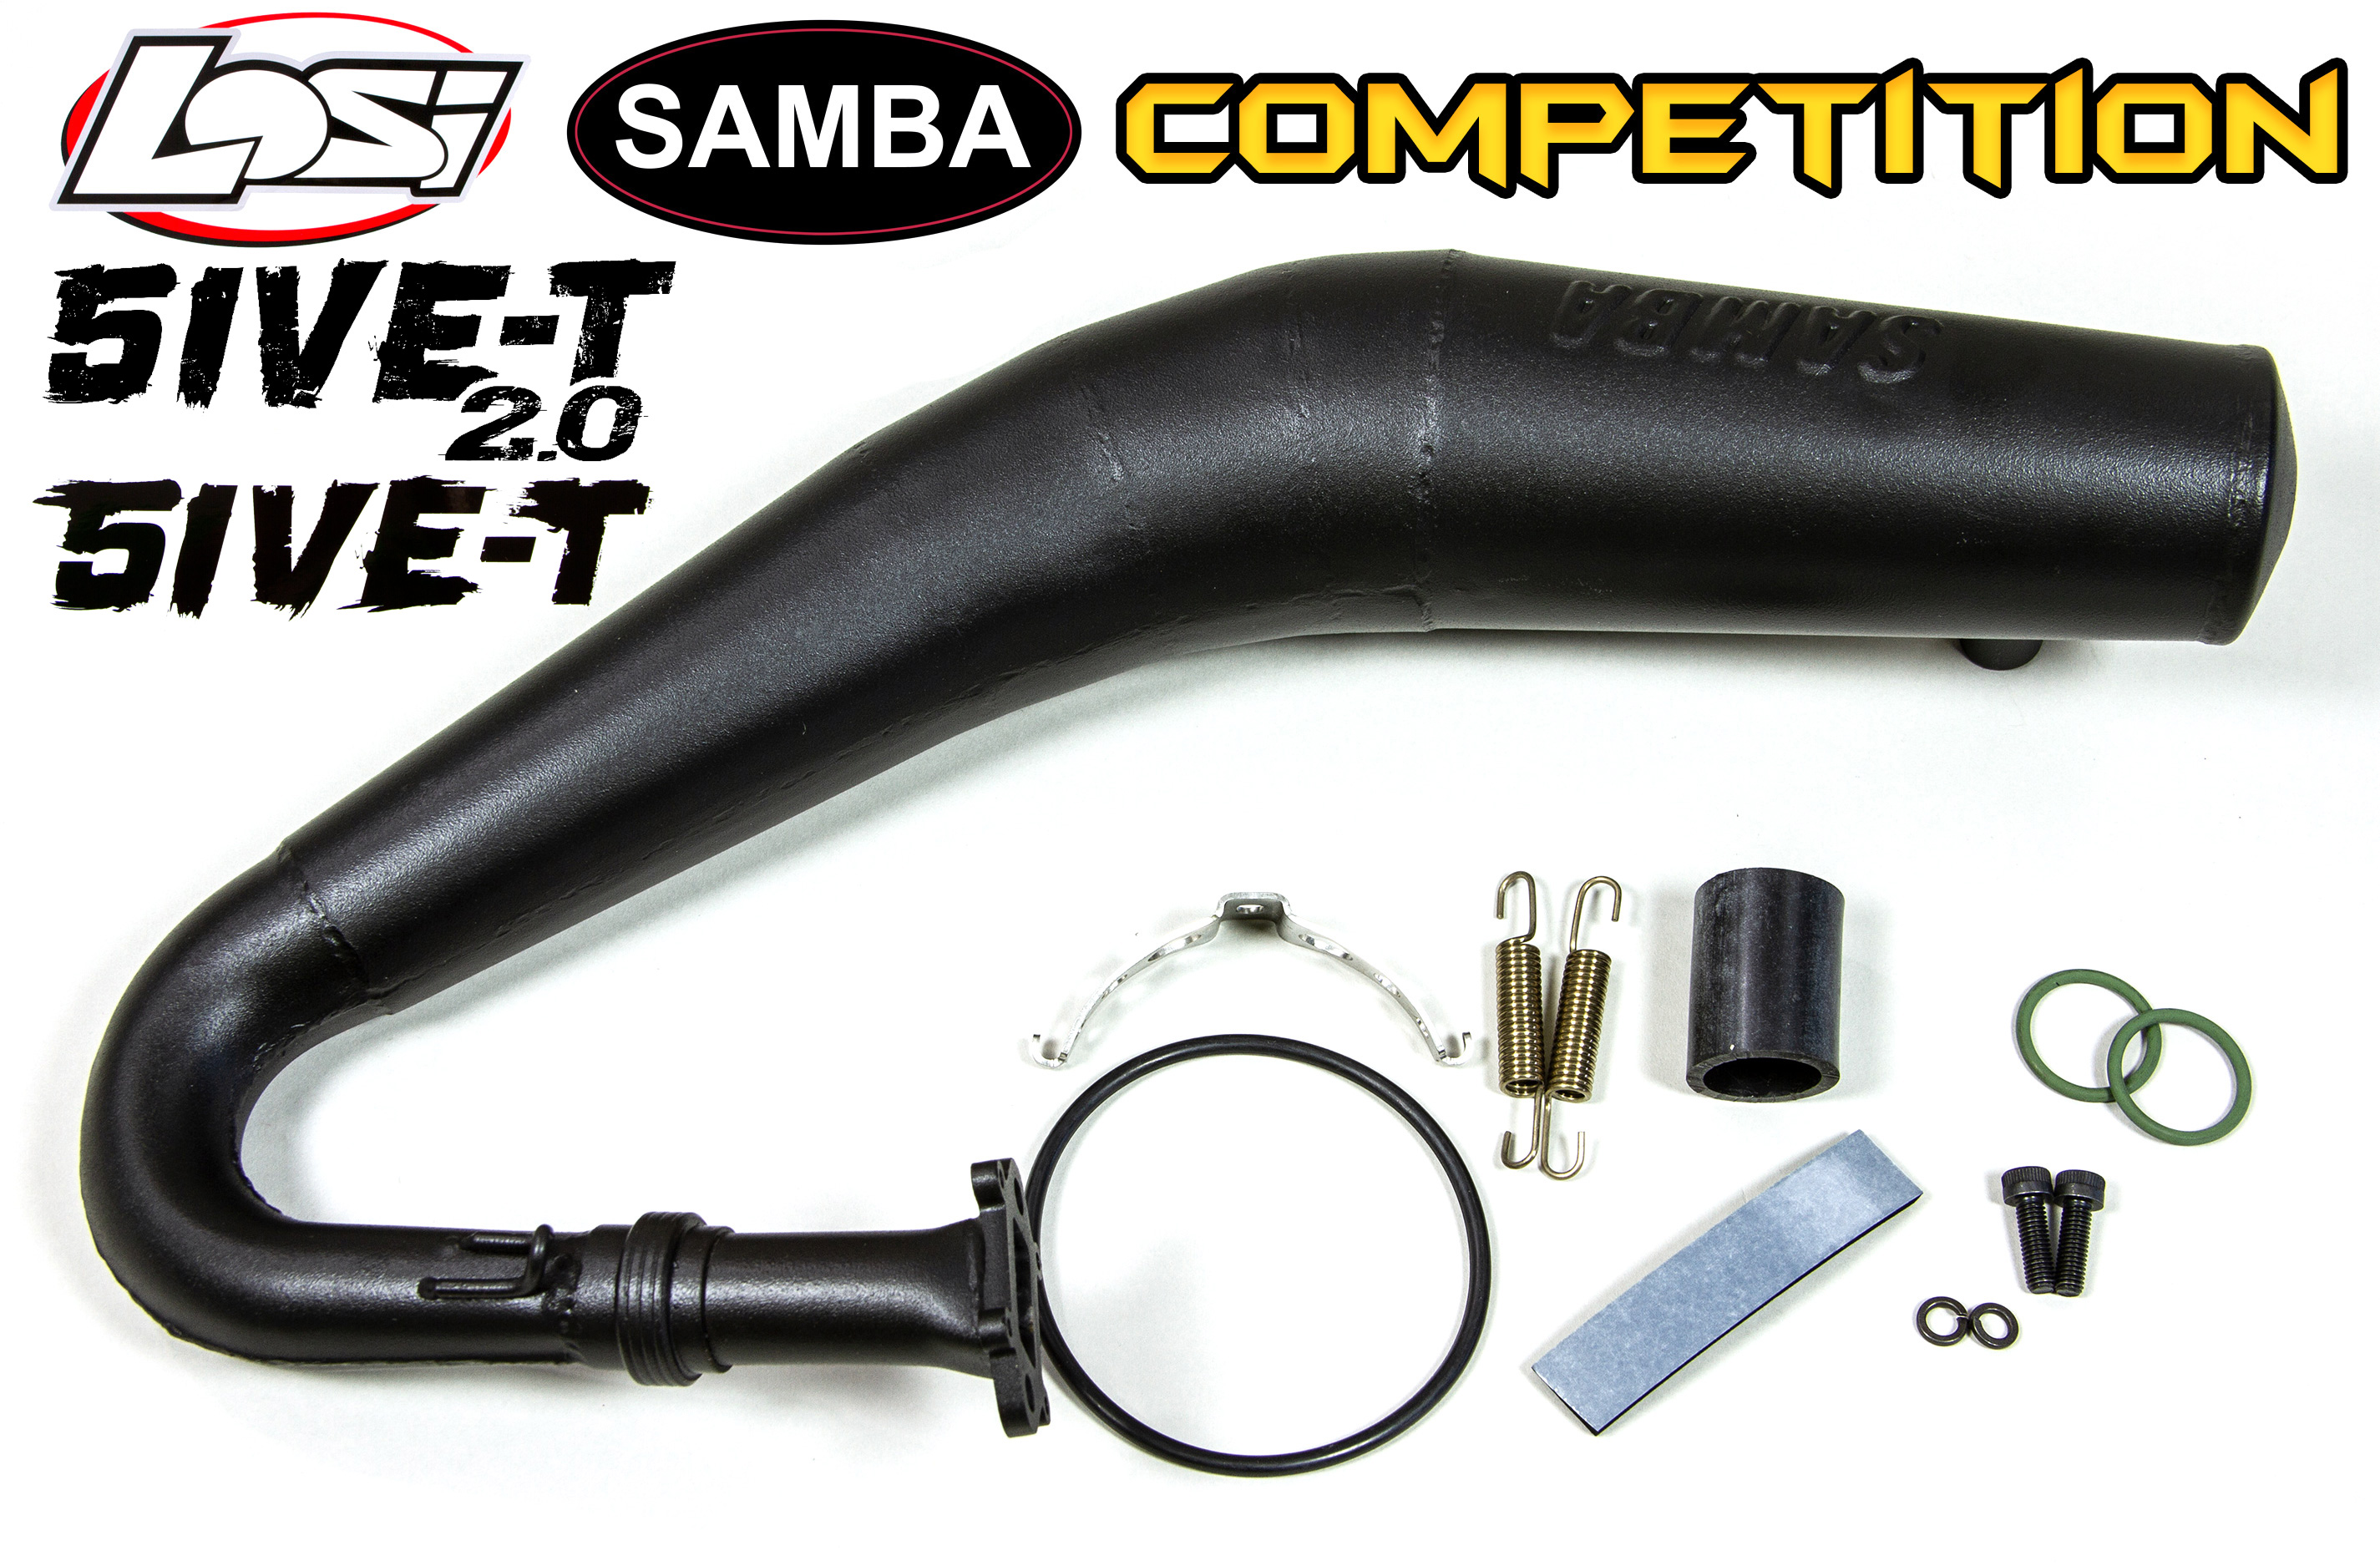 4820/32 Samba Competition  tuned pipe for Losi 5ive-T/ 2.0 until 32 cm³